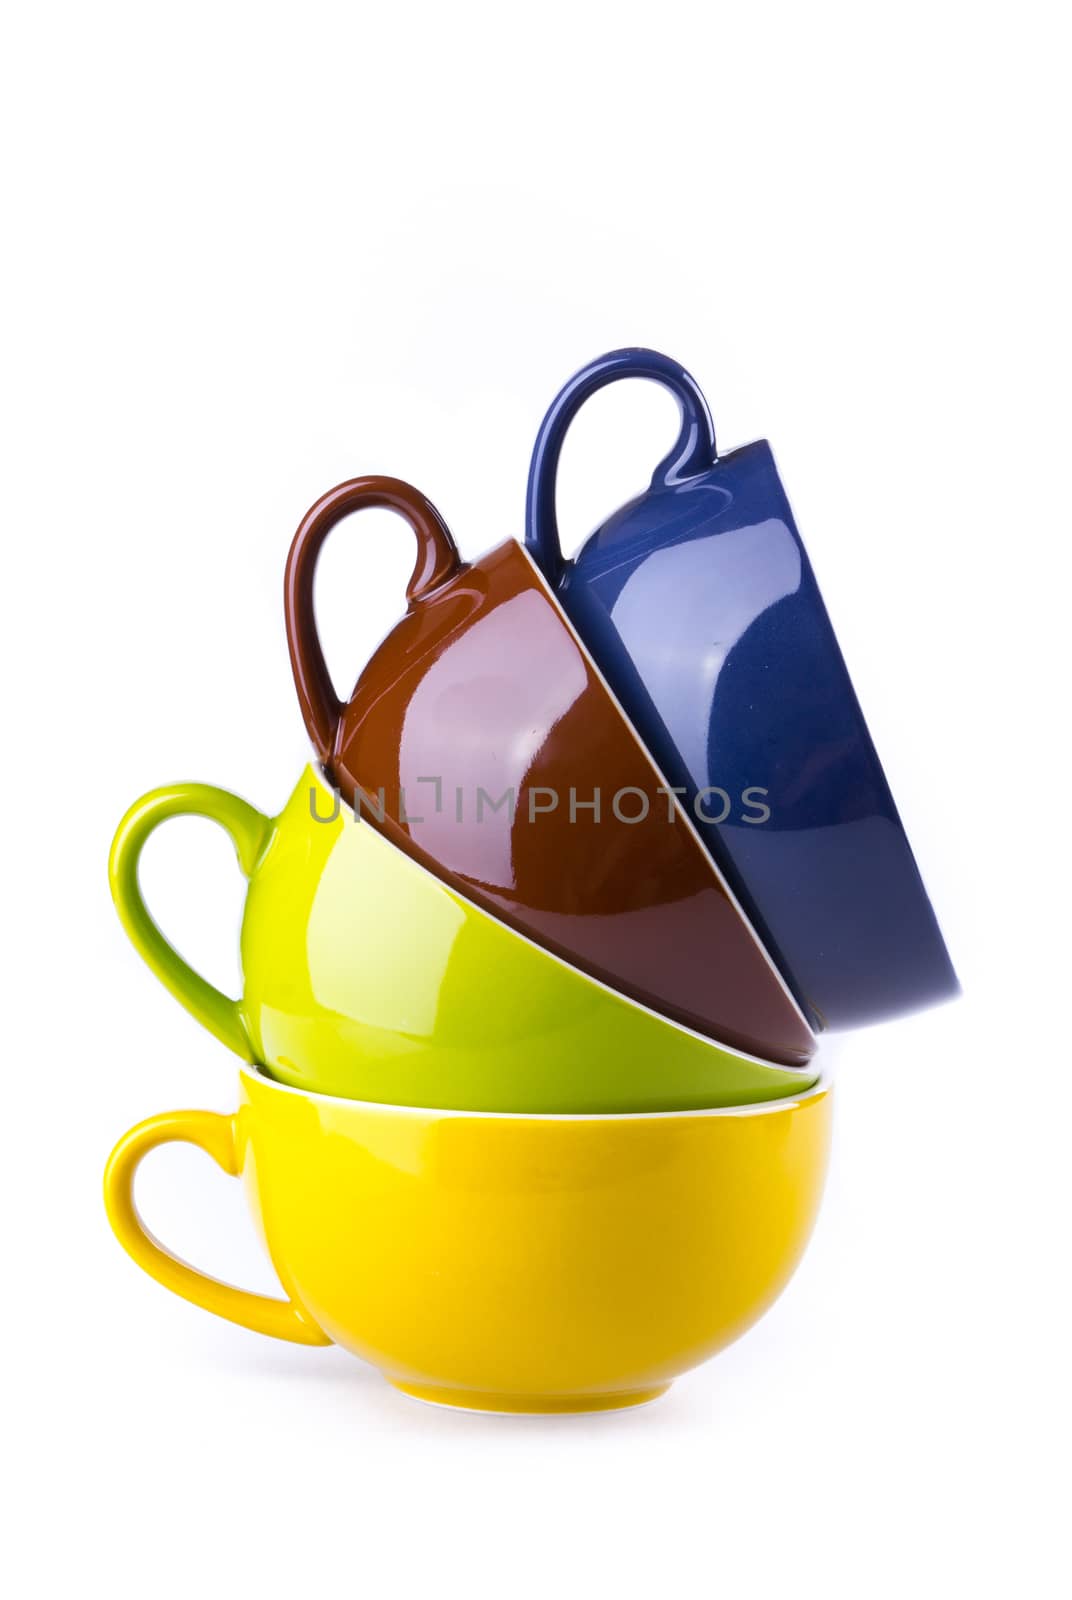 colorful ceramic cup on white background